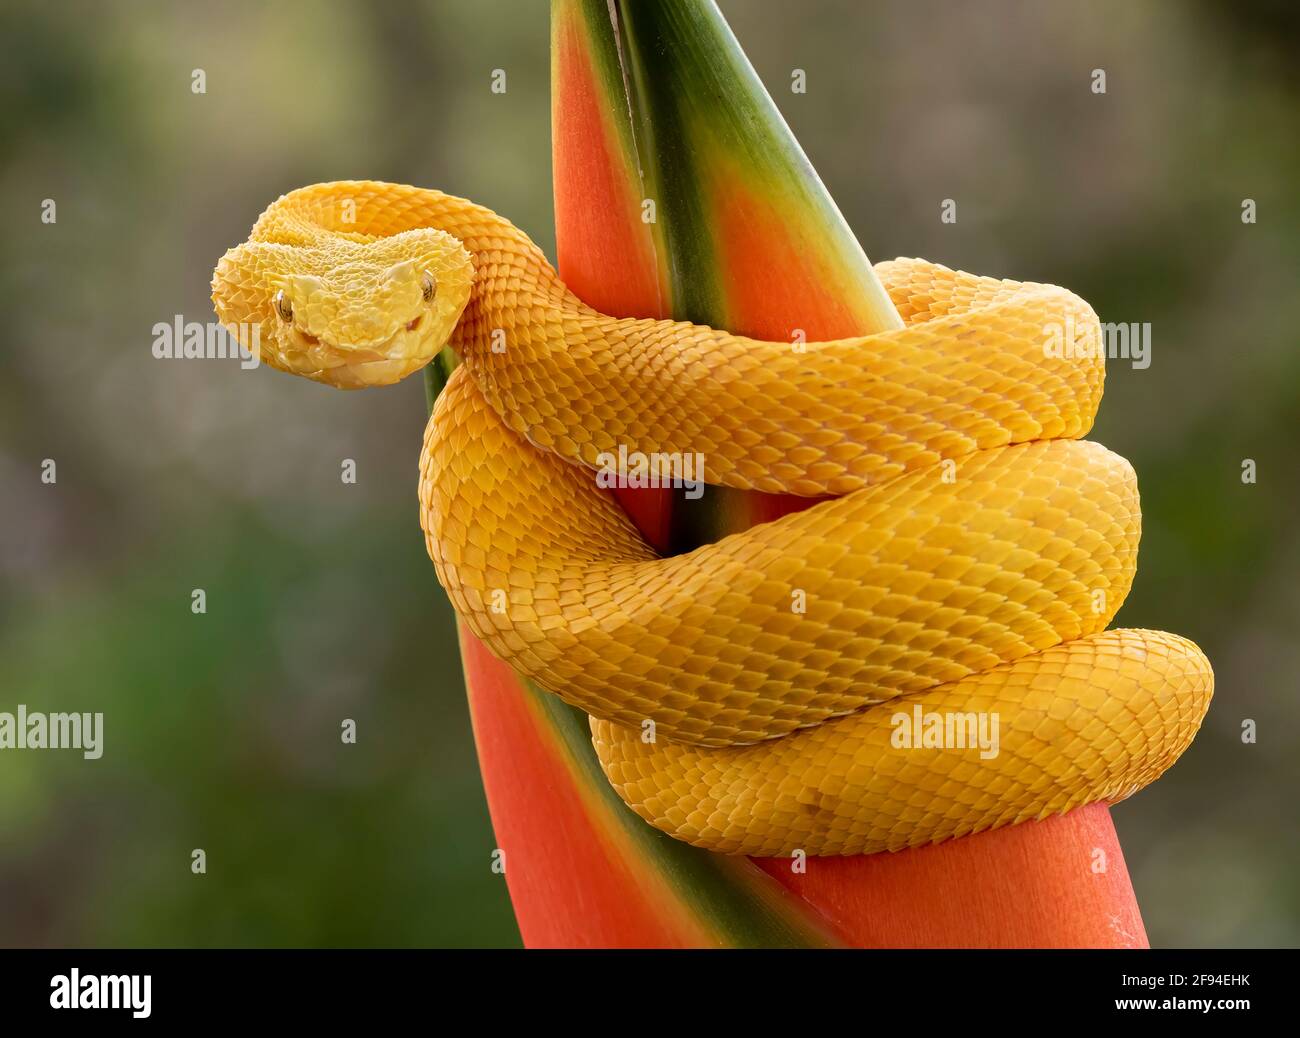 Eyelash pitviper snake coiled around a plant in Costa Rica Stock Photo